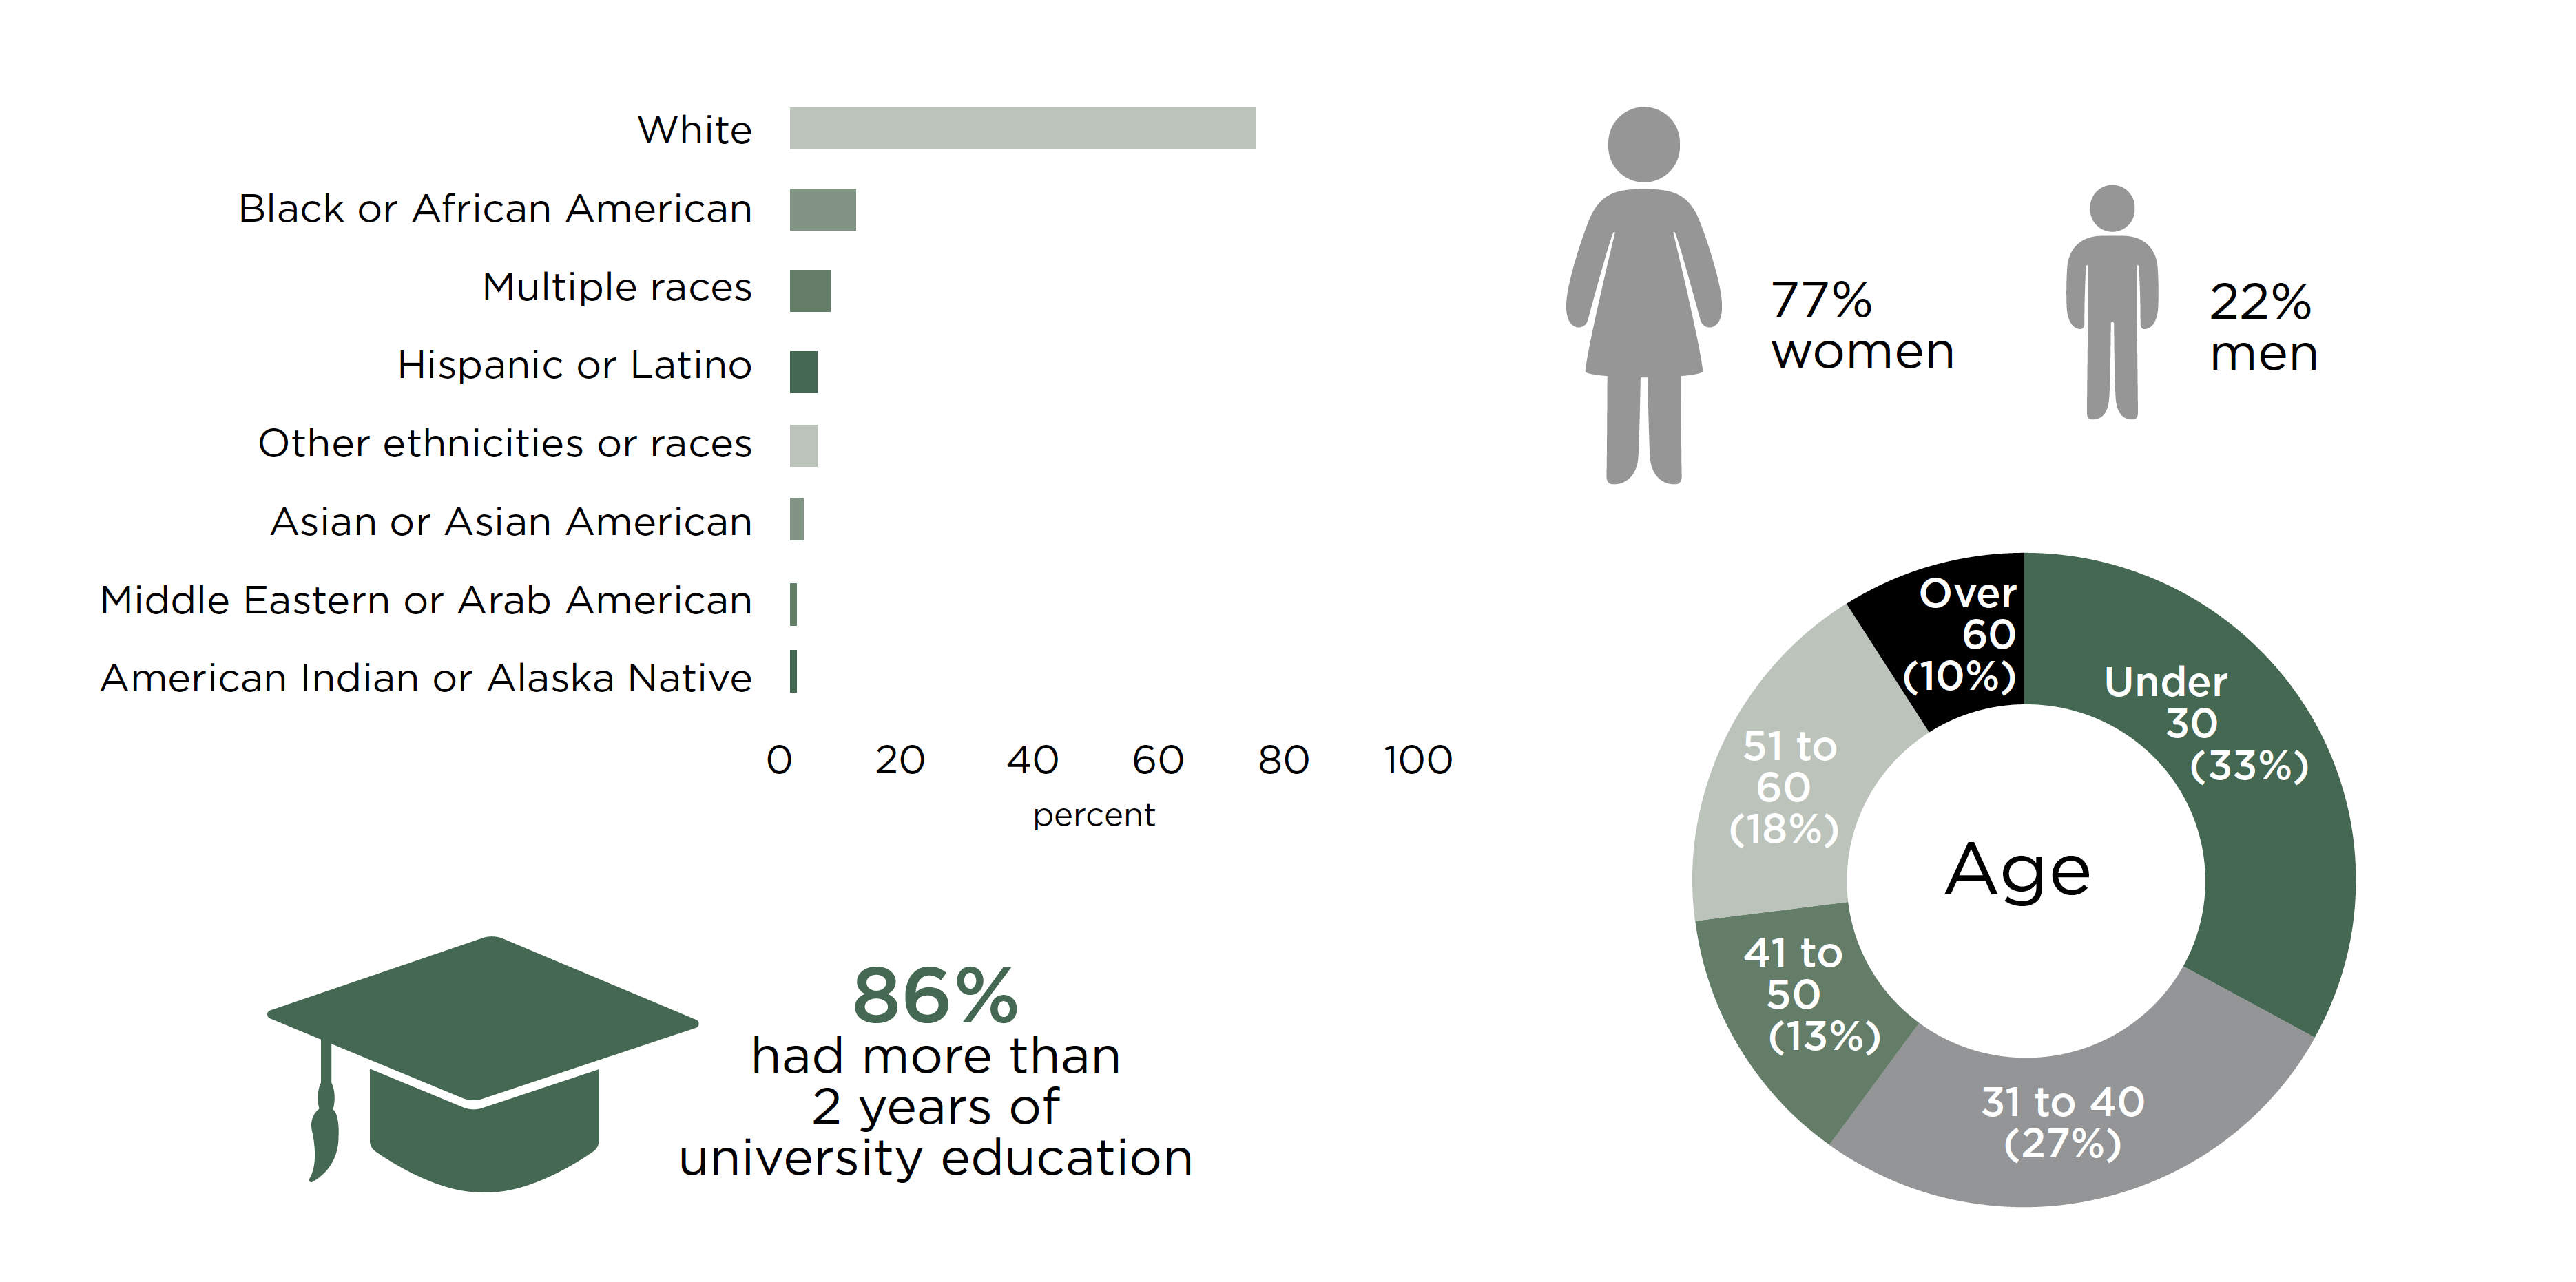 Demographics varied by event, but participants tended to be white women with a university degree and under the age of 40.